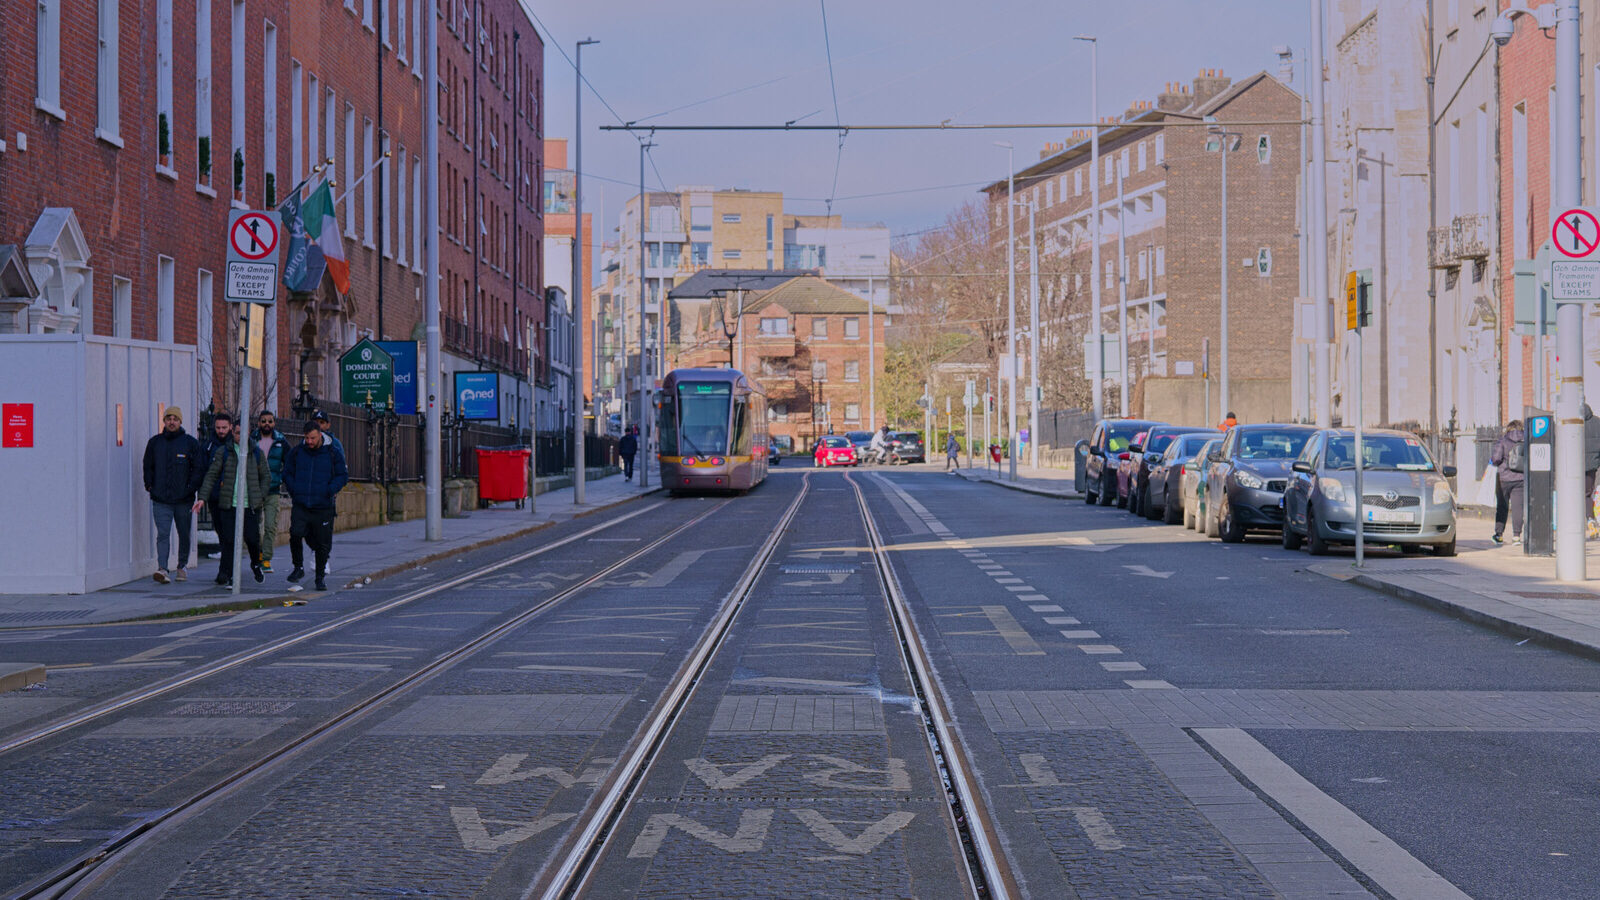 LUAS TRAM STOP AT LOWER DOMINICK STREET [AT THE MOMENT THE AREA DOES FEEL SAFER]-228688-1